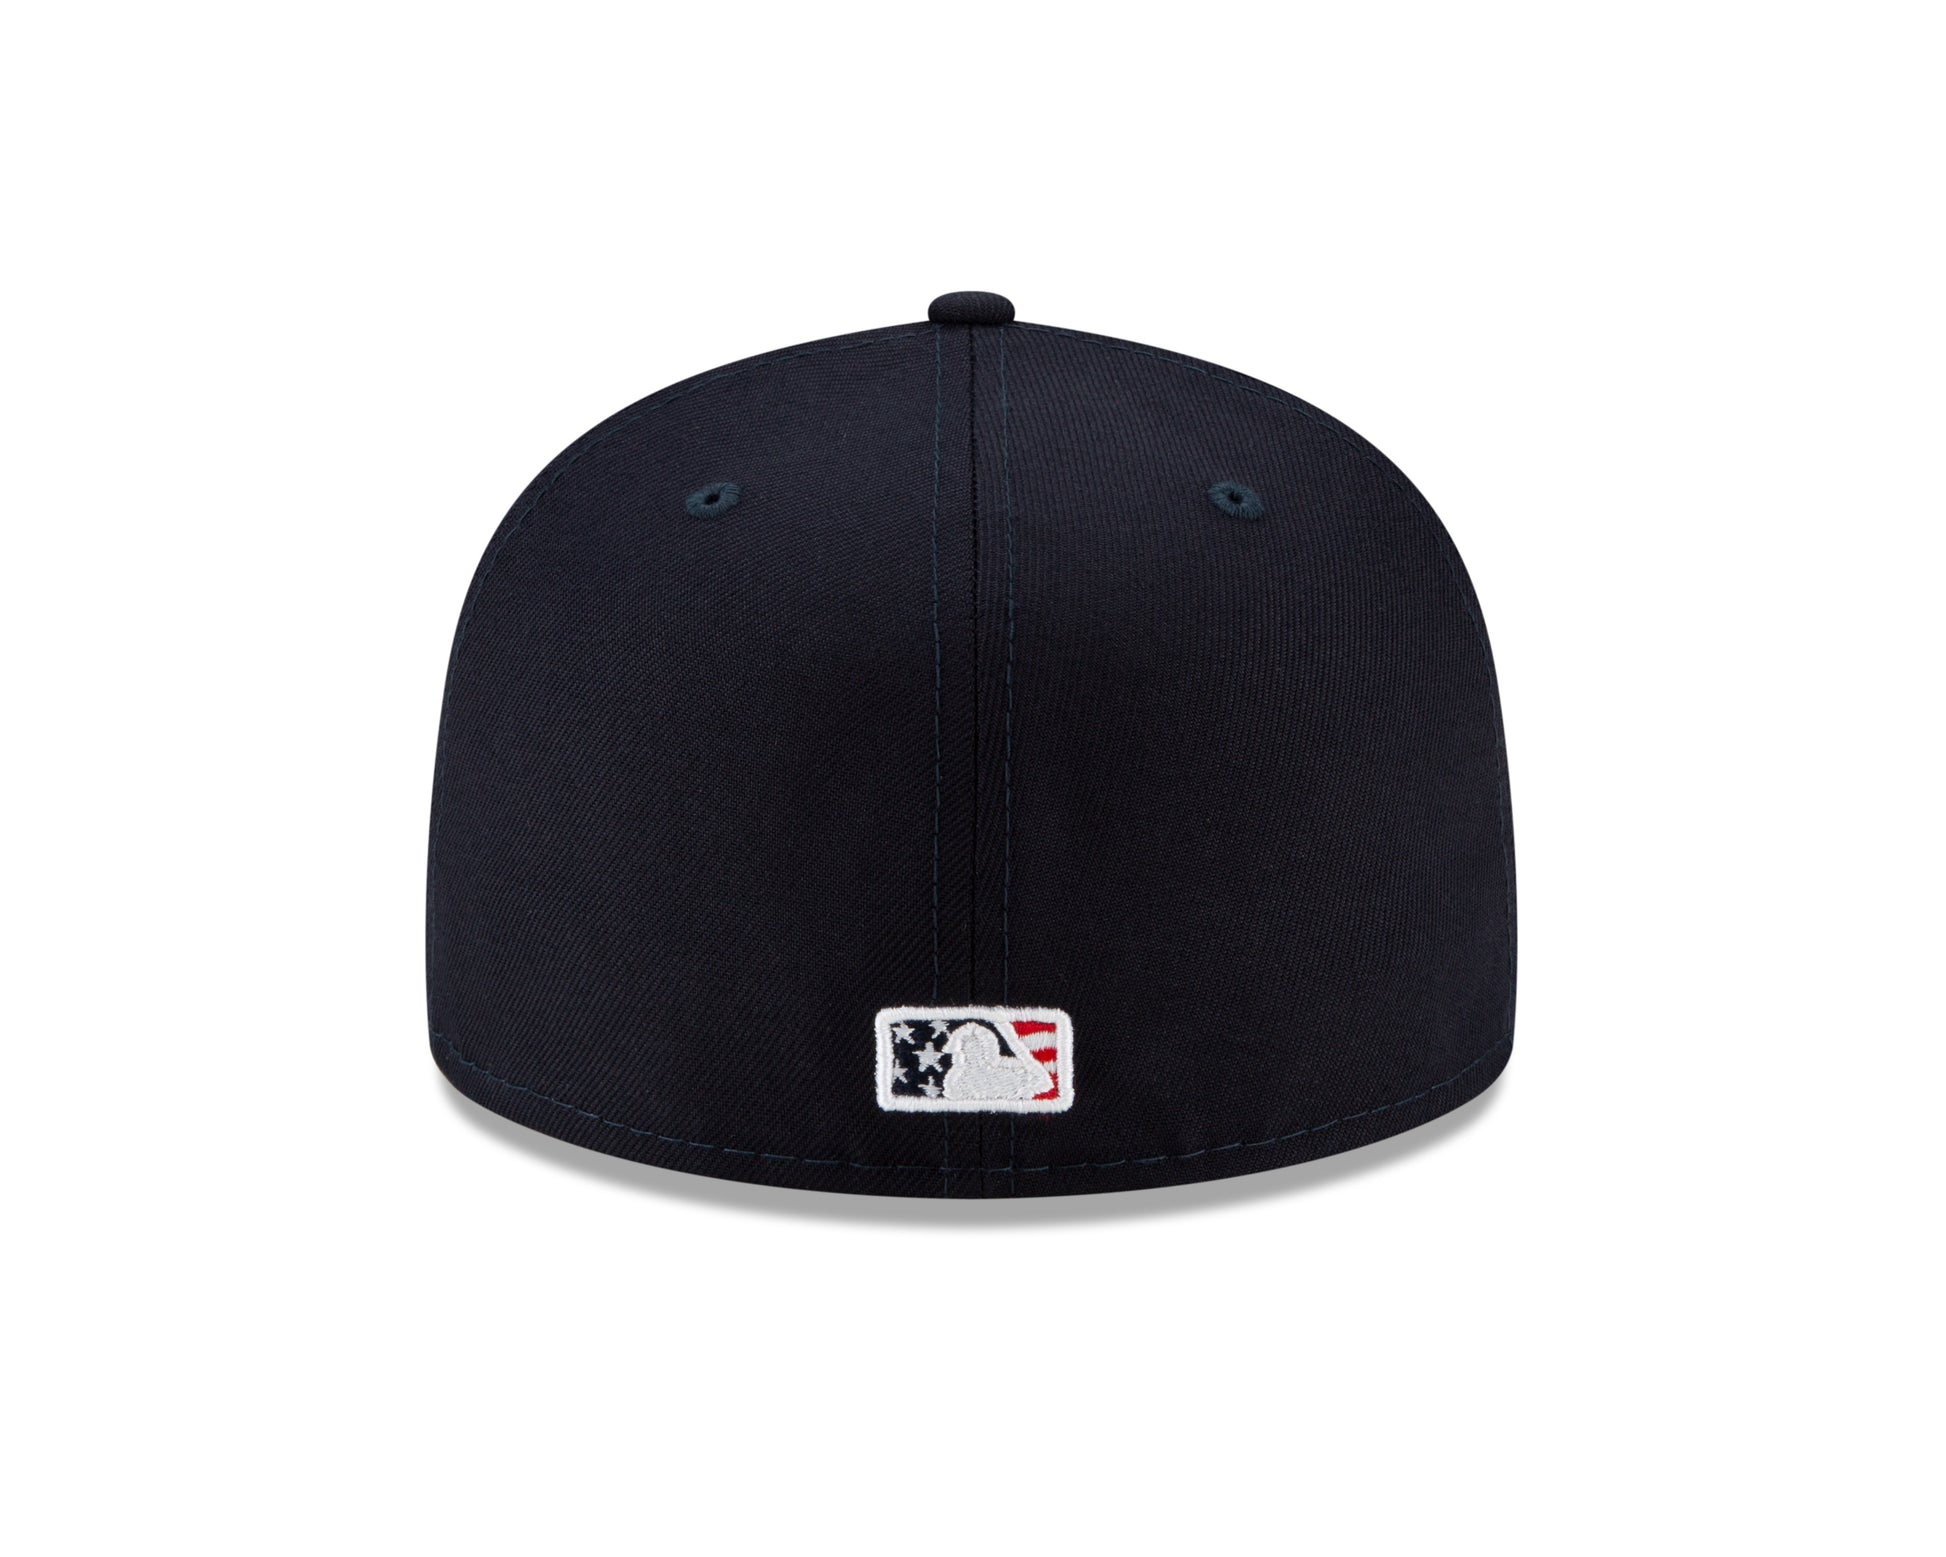 59Fifty Fitted Cap July 4 Texas Rangers - Navy - Headz Up 